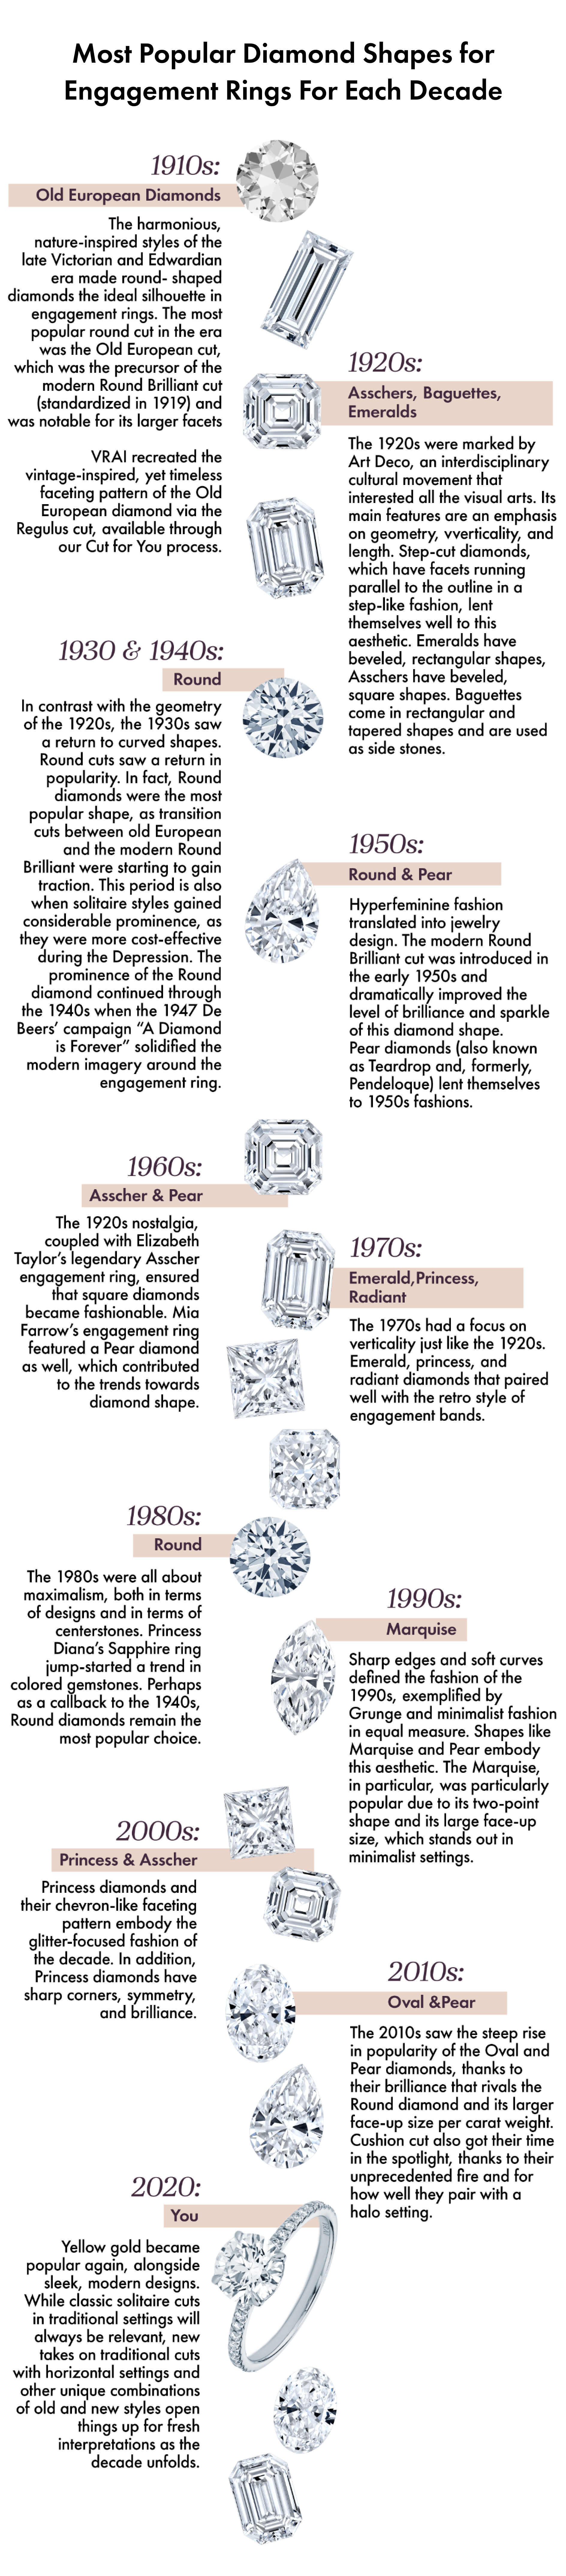 timeline showing the most popular diamond shapes for engagement rings for each decade from the 1910s to the 2020s